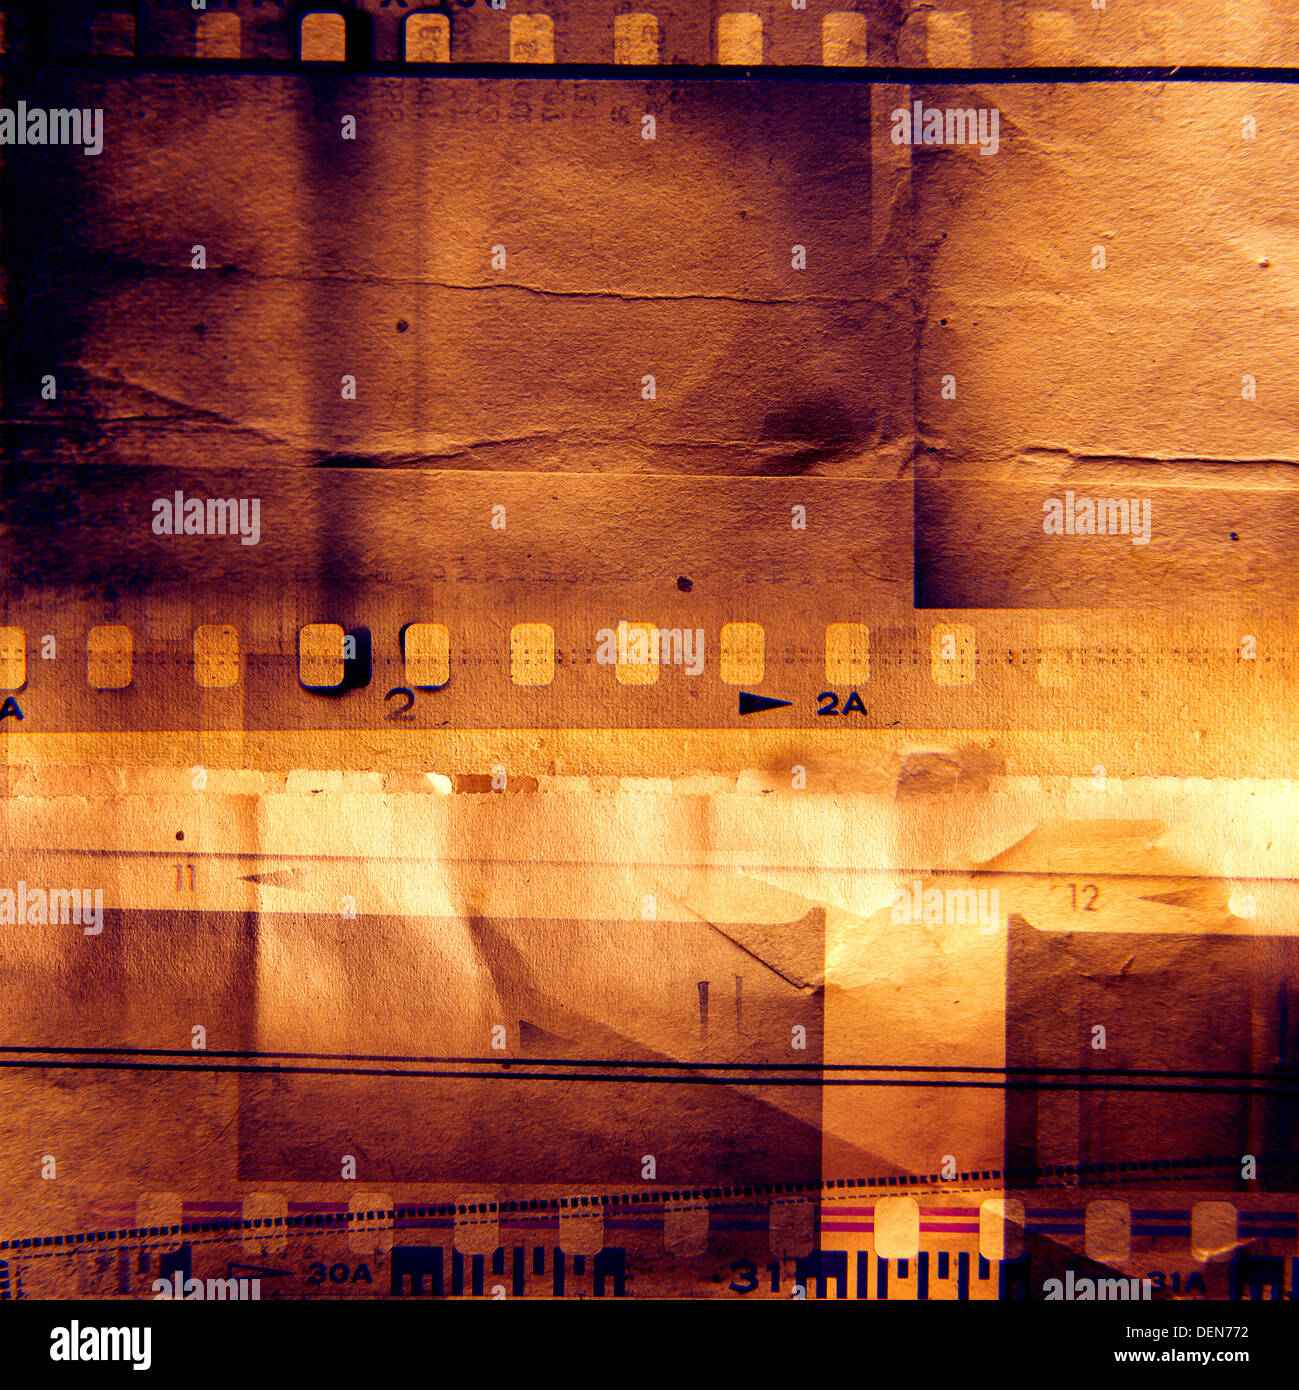 Film strips and grunge paper Stock Photo